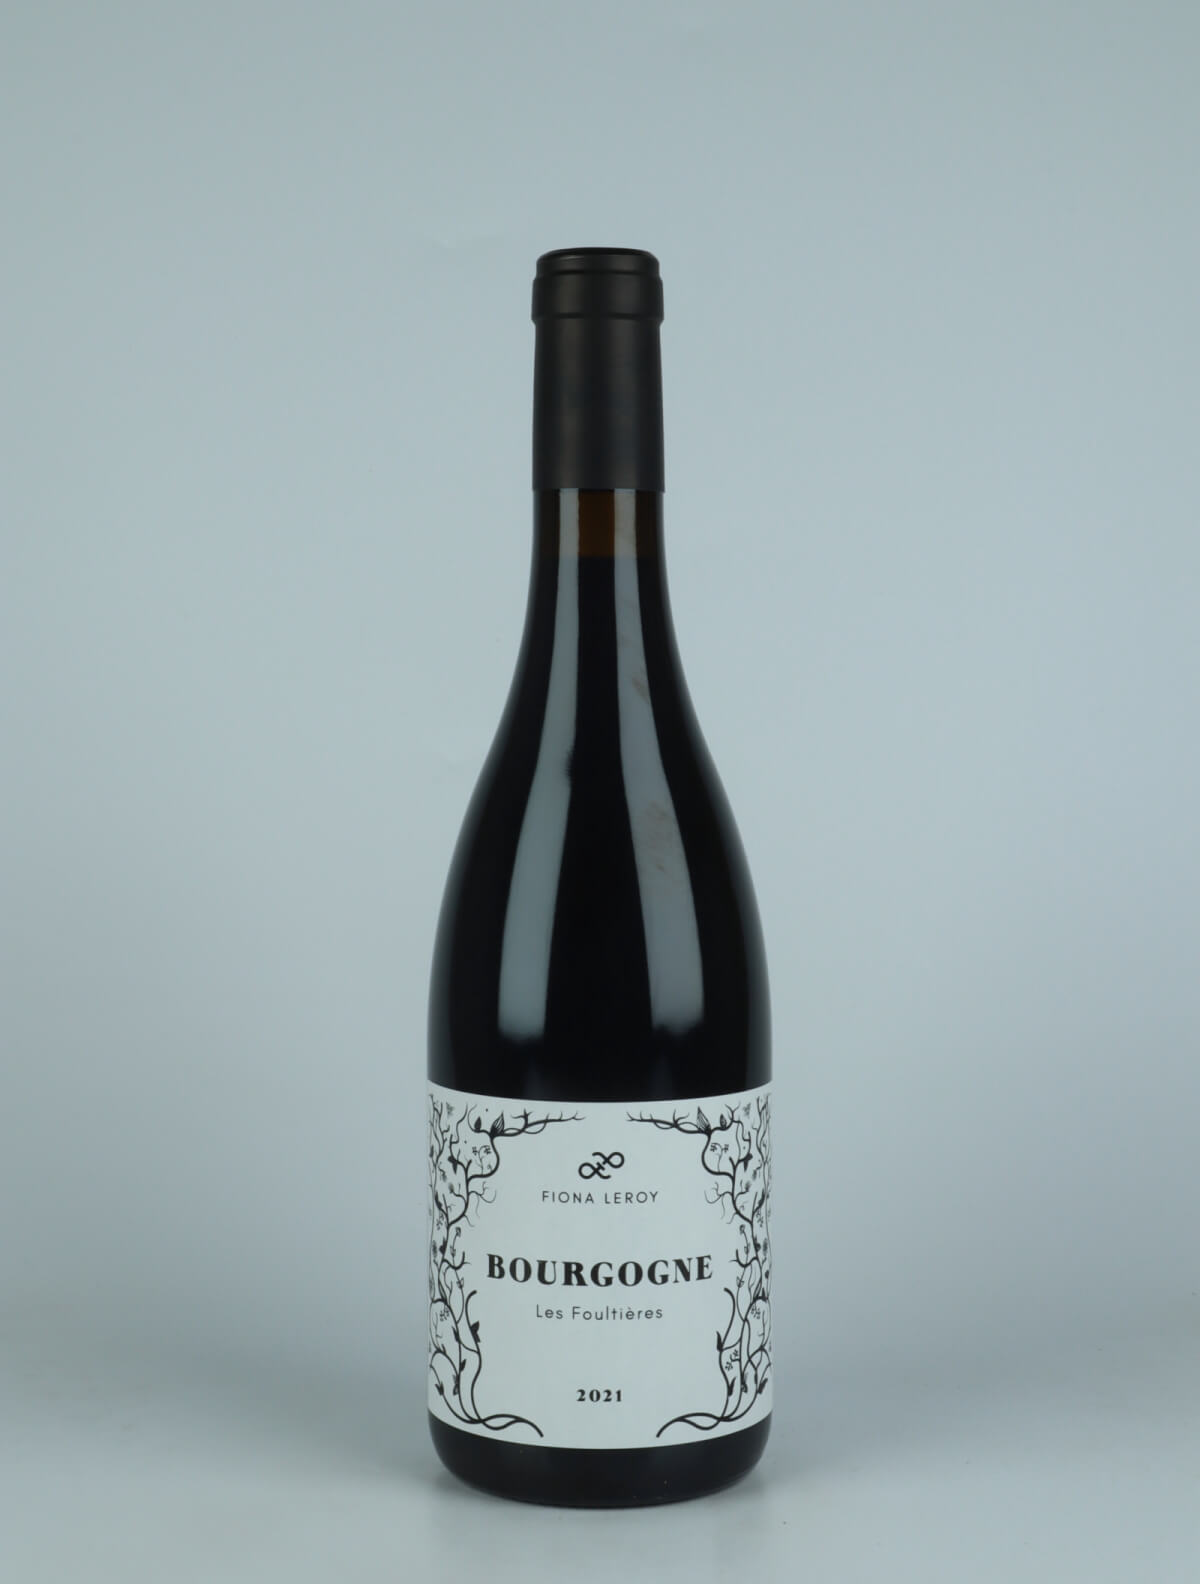 A bottle 2021 Bourgogne Rouge - Les Foultières Red wine from Fiona Leroy, Burgundy in France